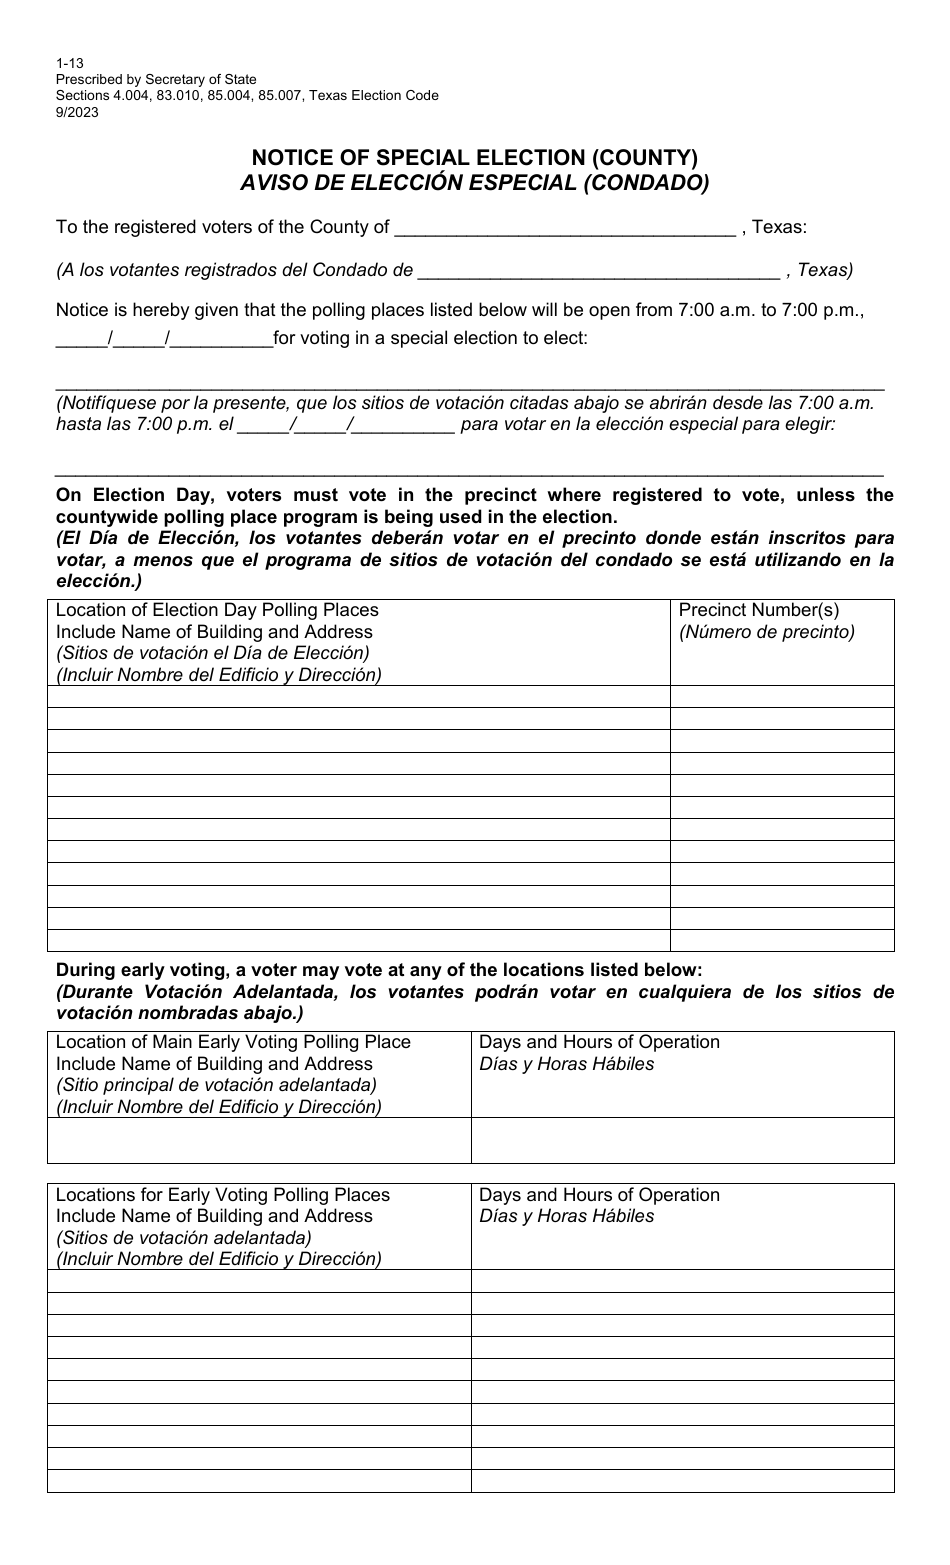 Form 1-13 Notice of Special Election (County Election) - Texas (English / Spanish), Page 1